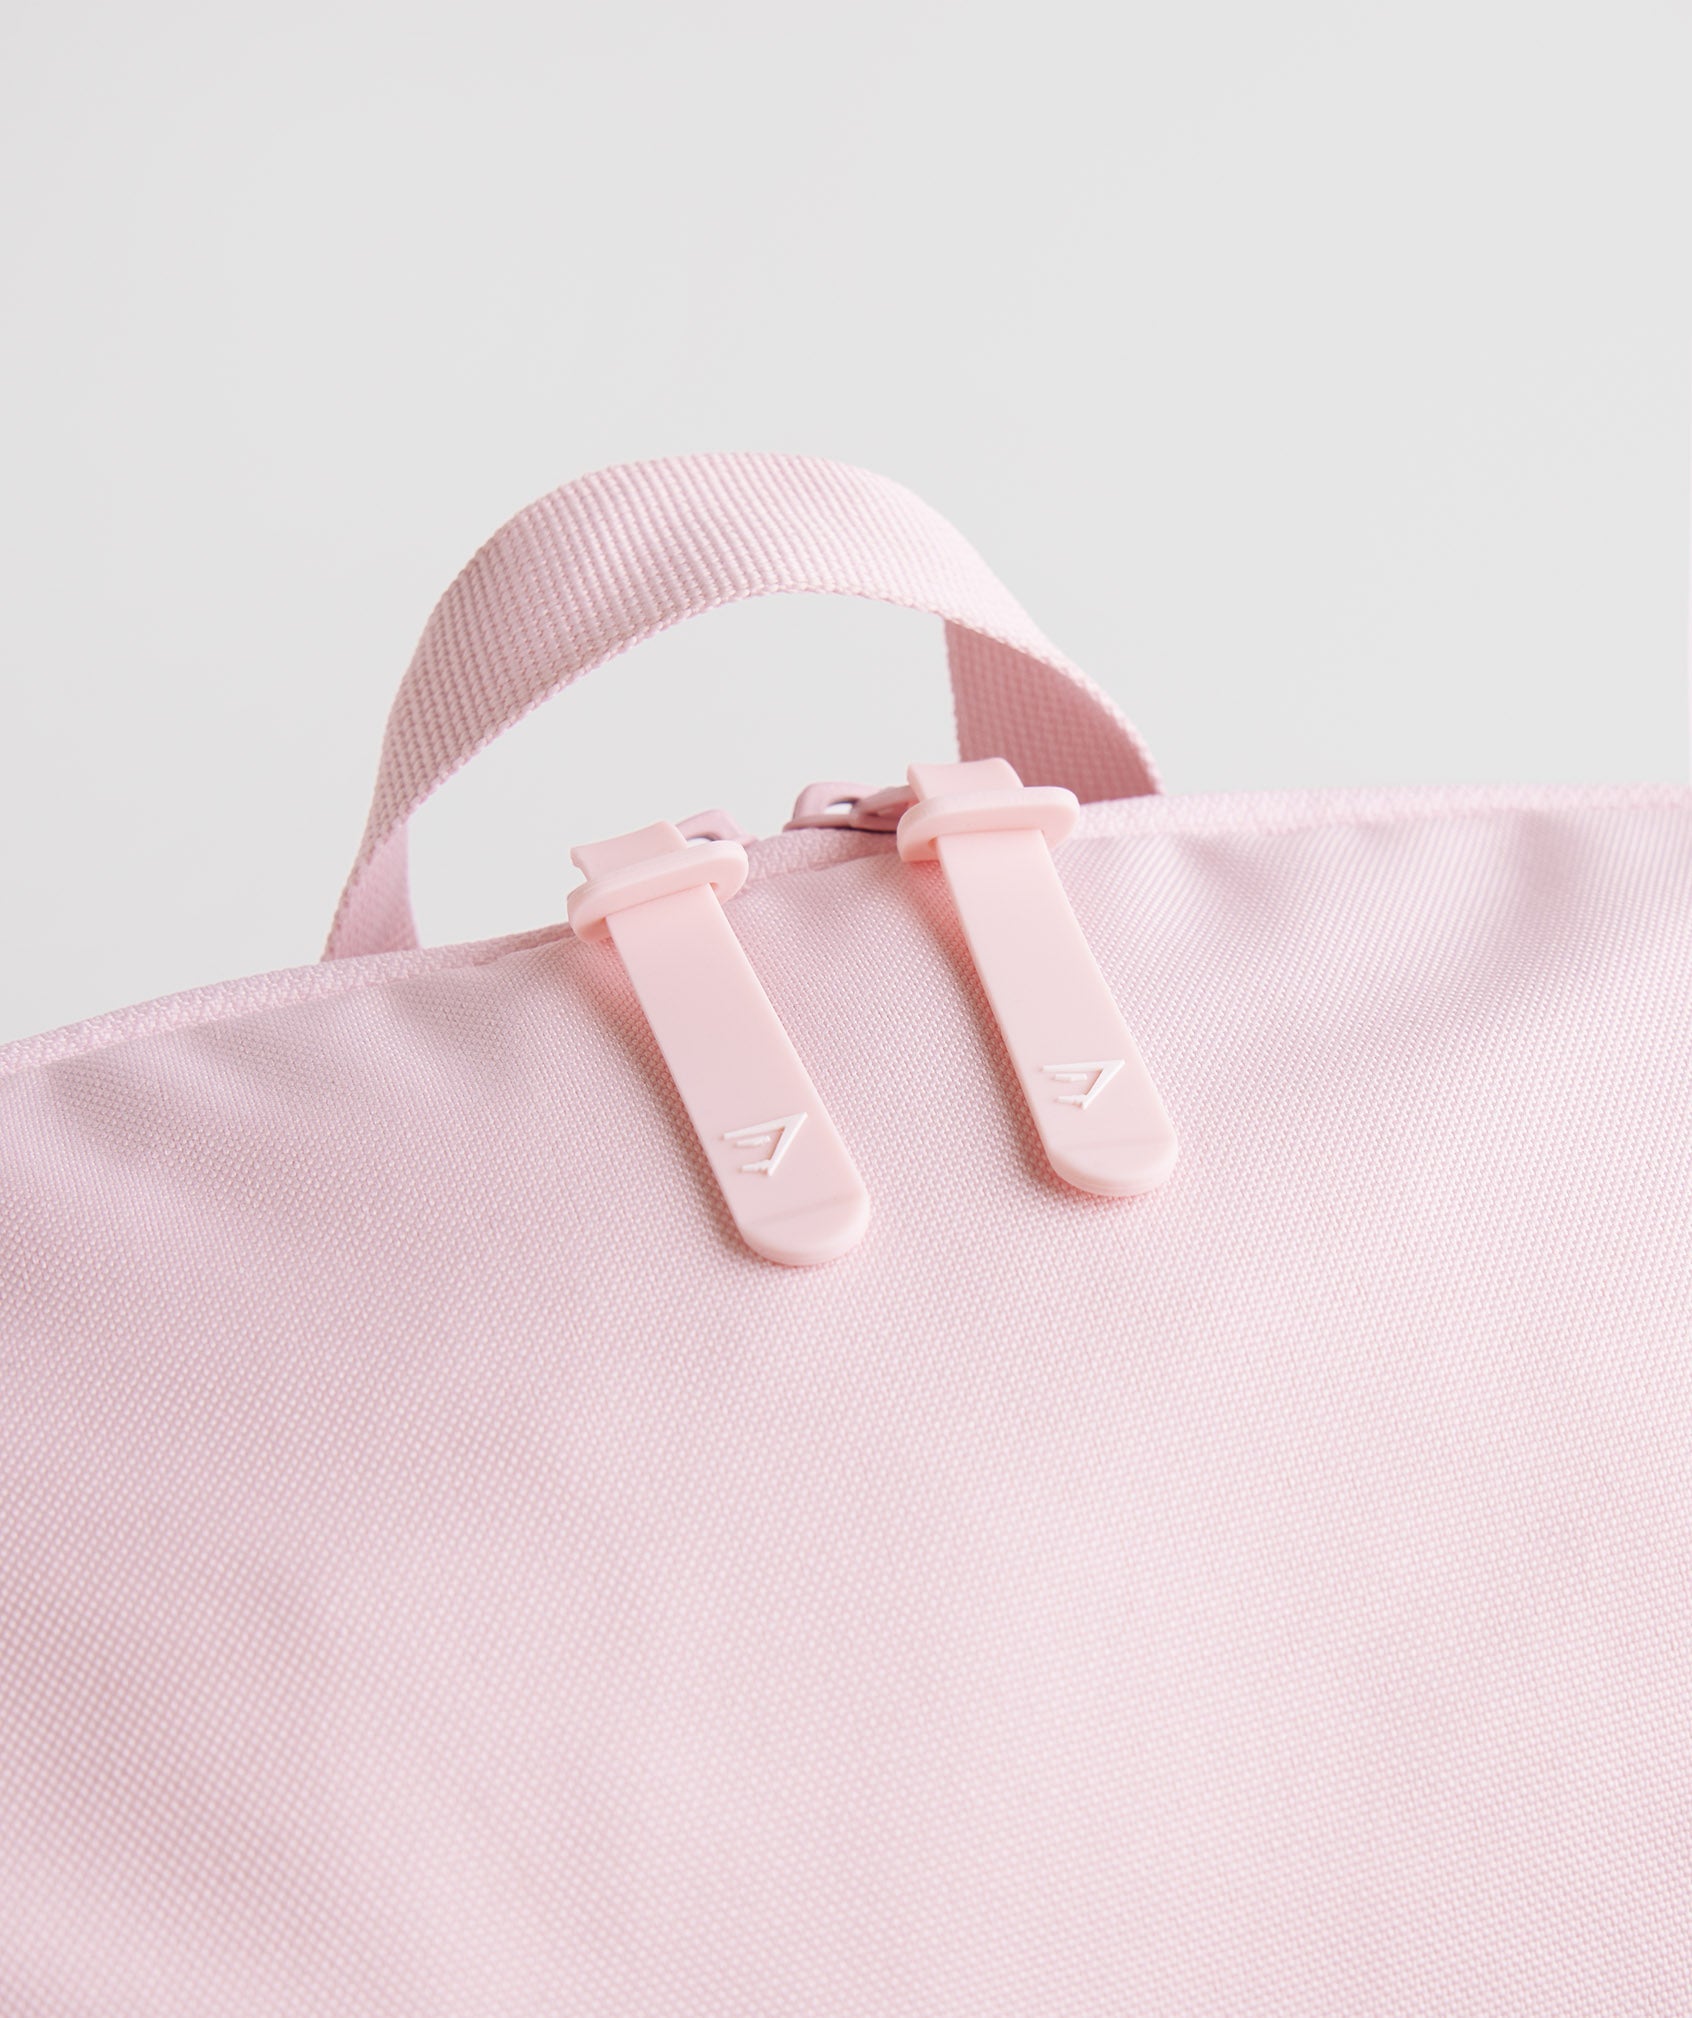 Sharkhead Backpack in Sweet Pink - view 3